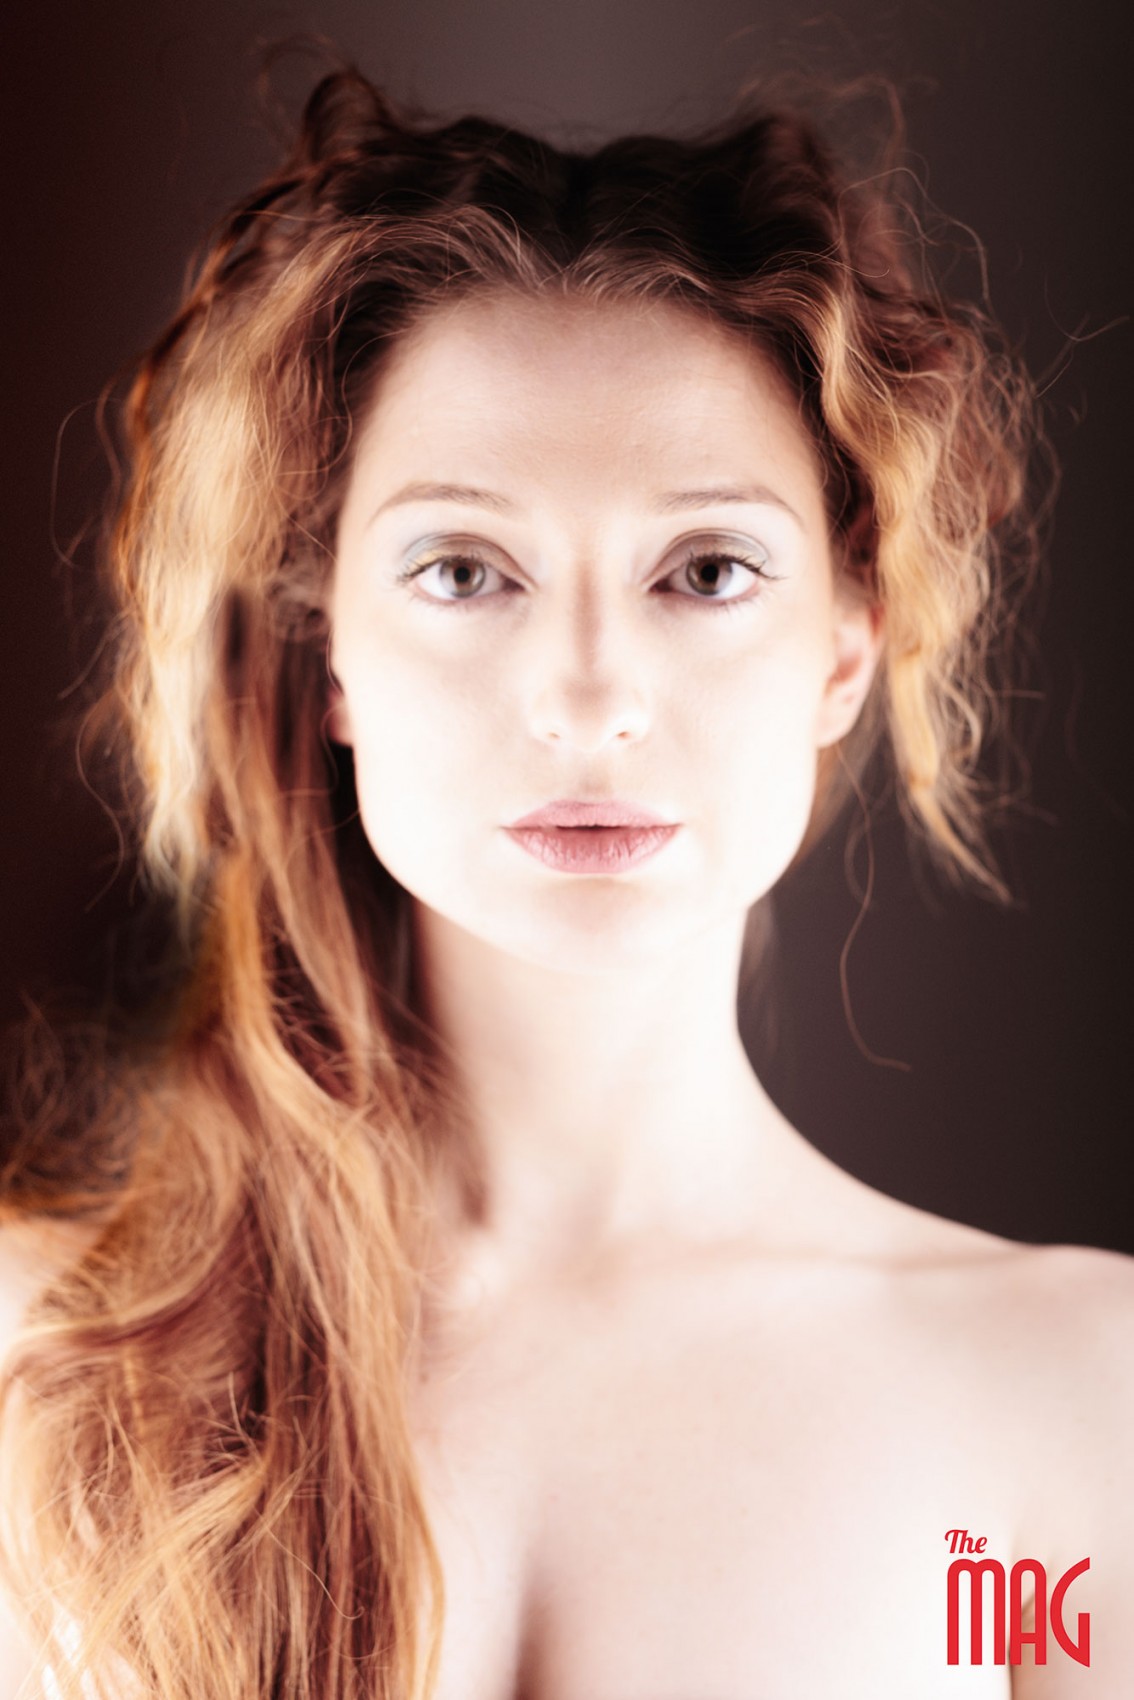 The Mag - Ginger Beauty con Veronica Riguccini